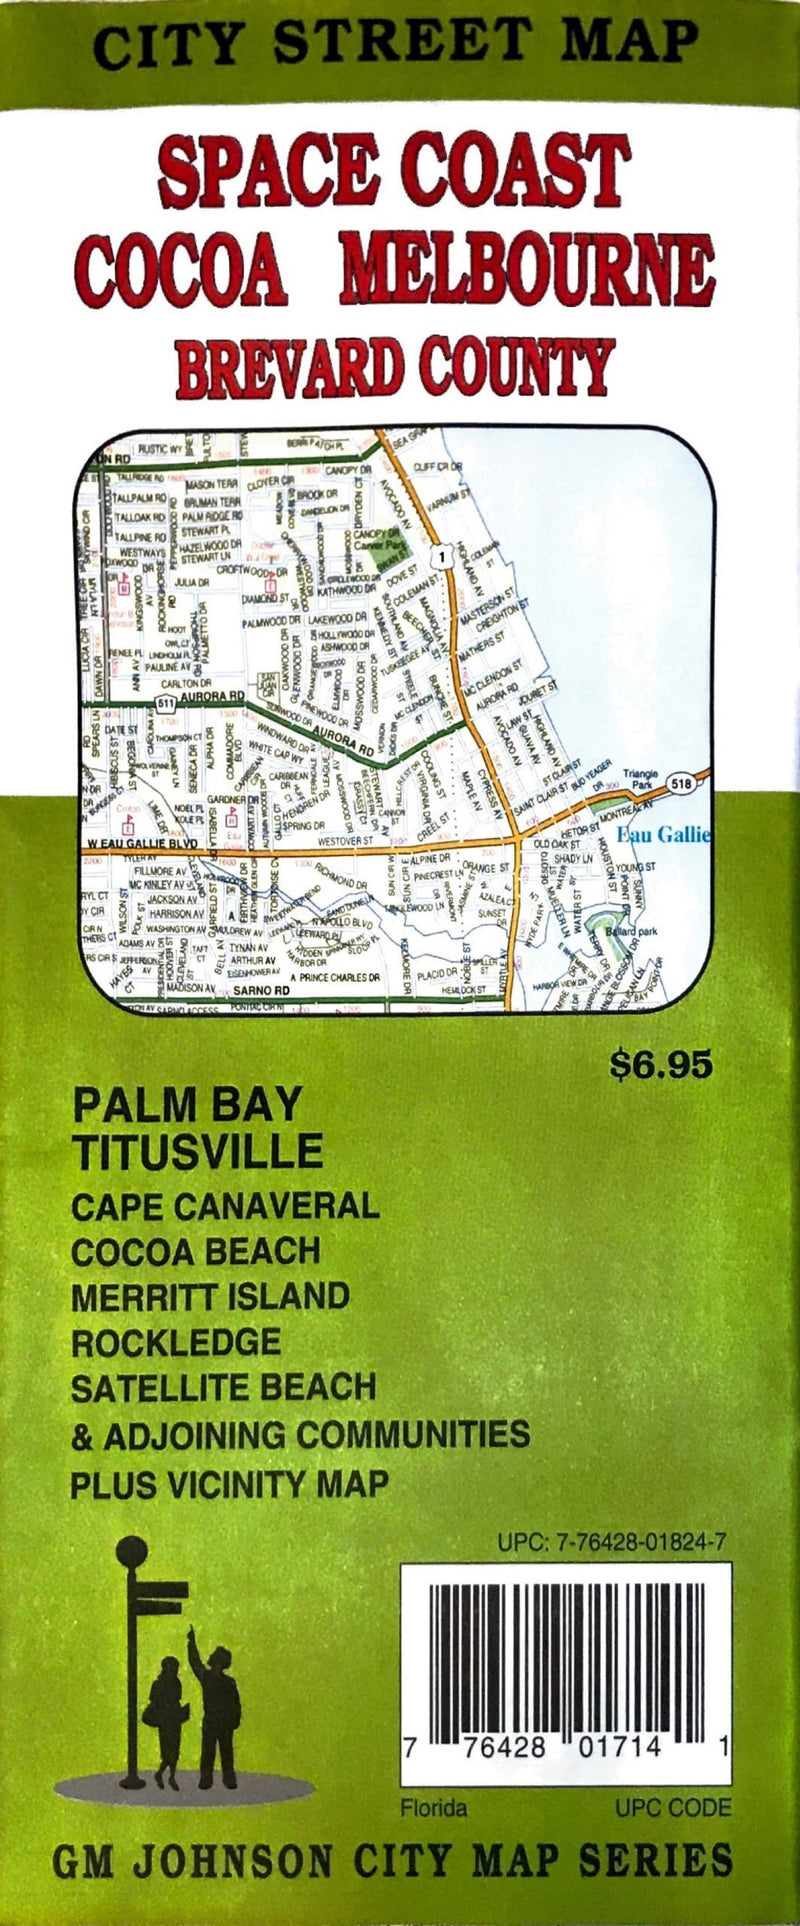 Cocoa, Melbourne And Brevard County, Florida Road Map